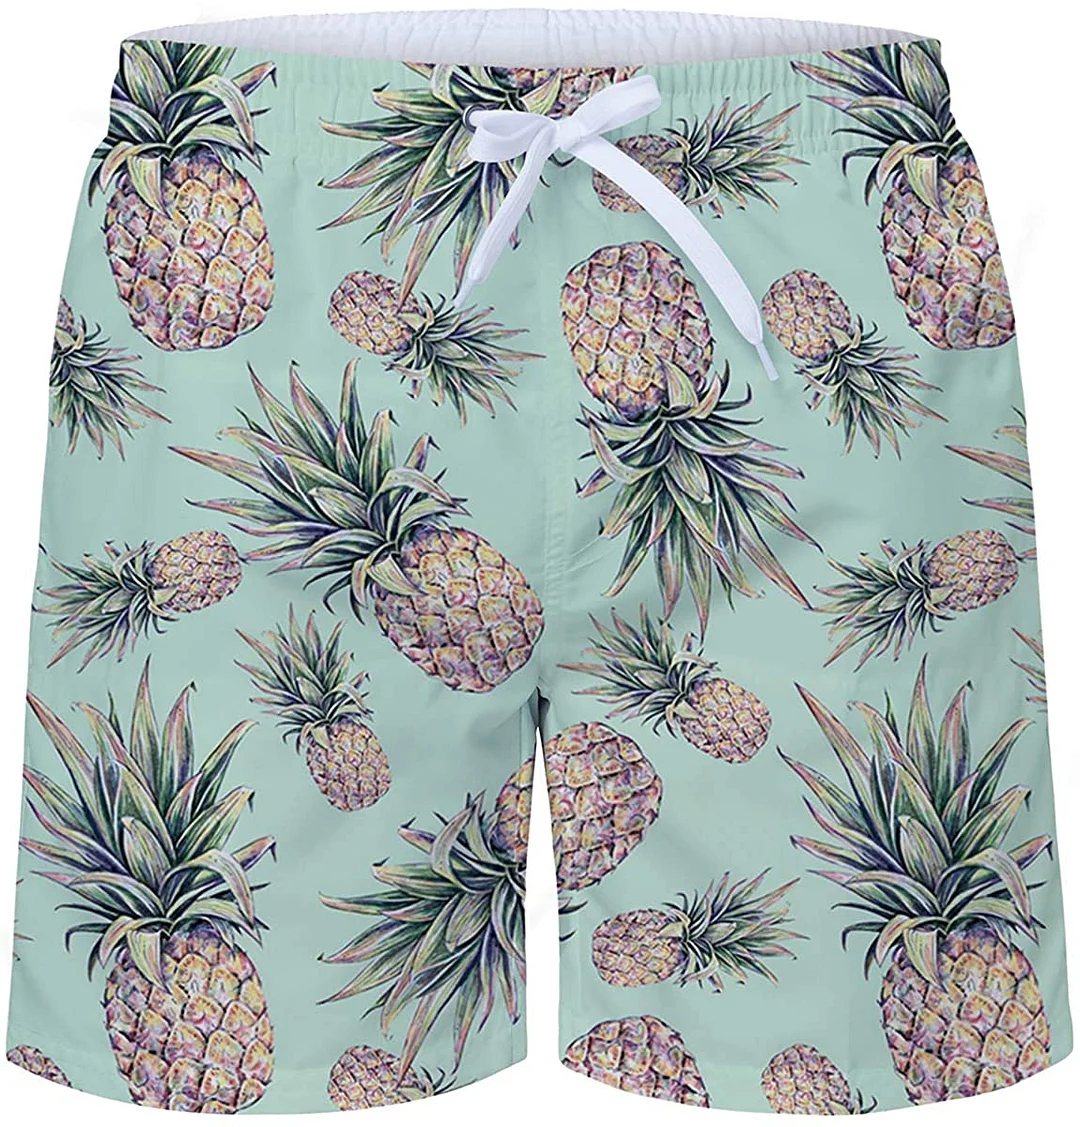 Men's Bathing Suits 3D Print Pineapple Swim Trunks Waterproof Swimsuits for Summer Casual